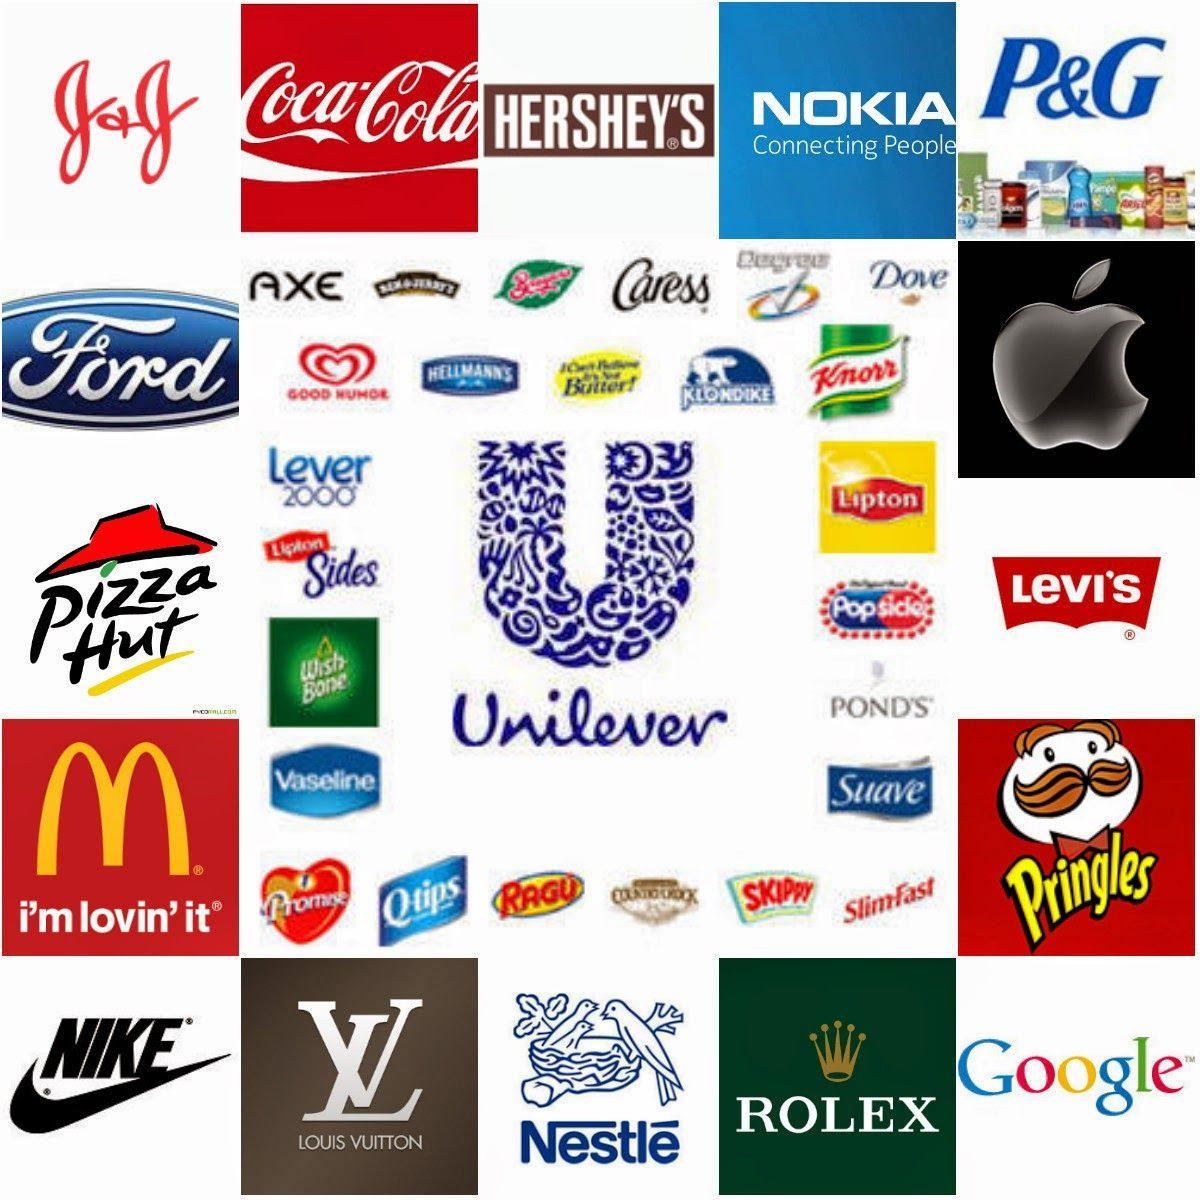 Brand Names Logo - Amazing Collage Brand Logos Images With Names | Brand Logos Pictures ...